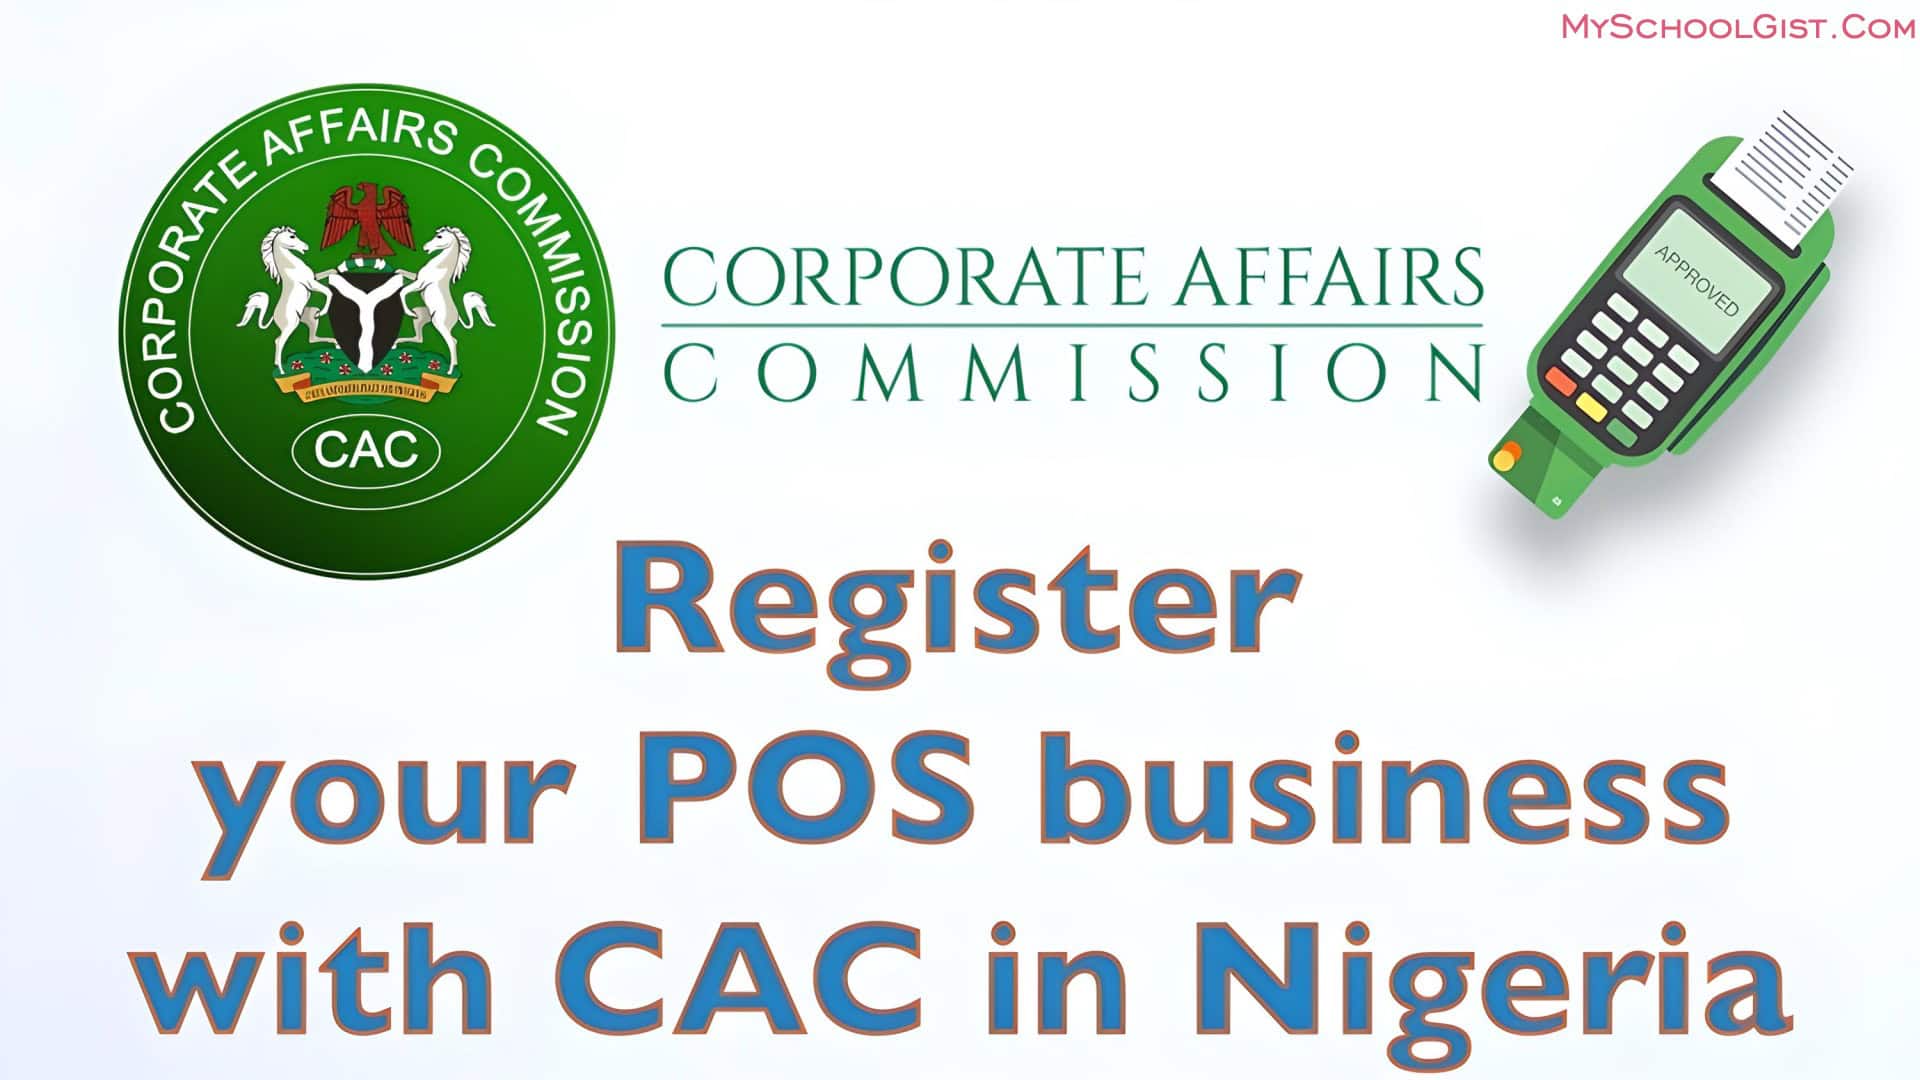 How to Register Your POS Business with CAC